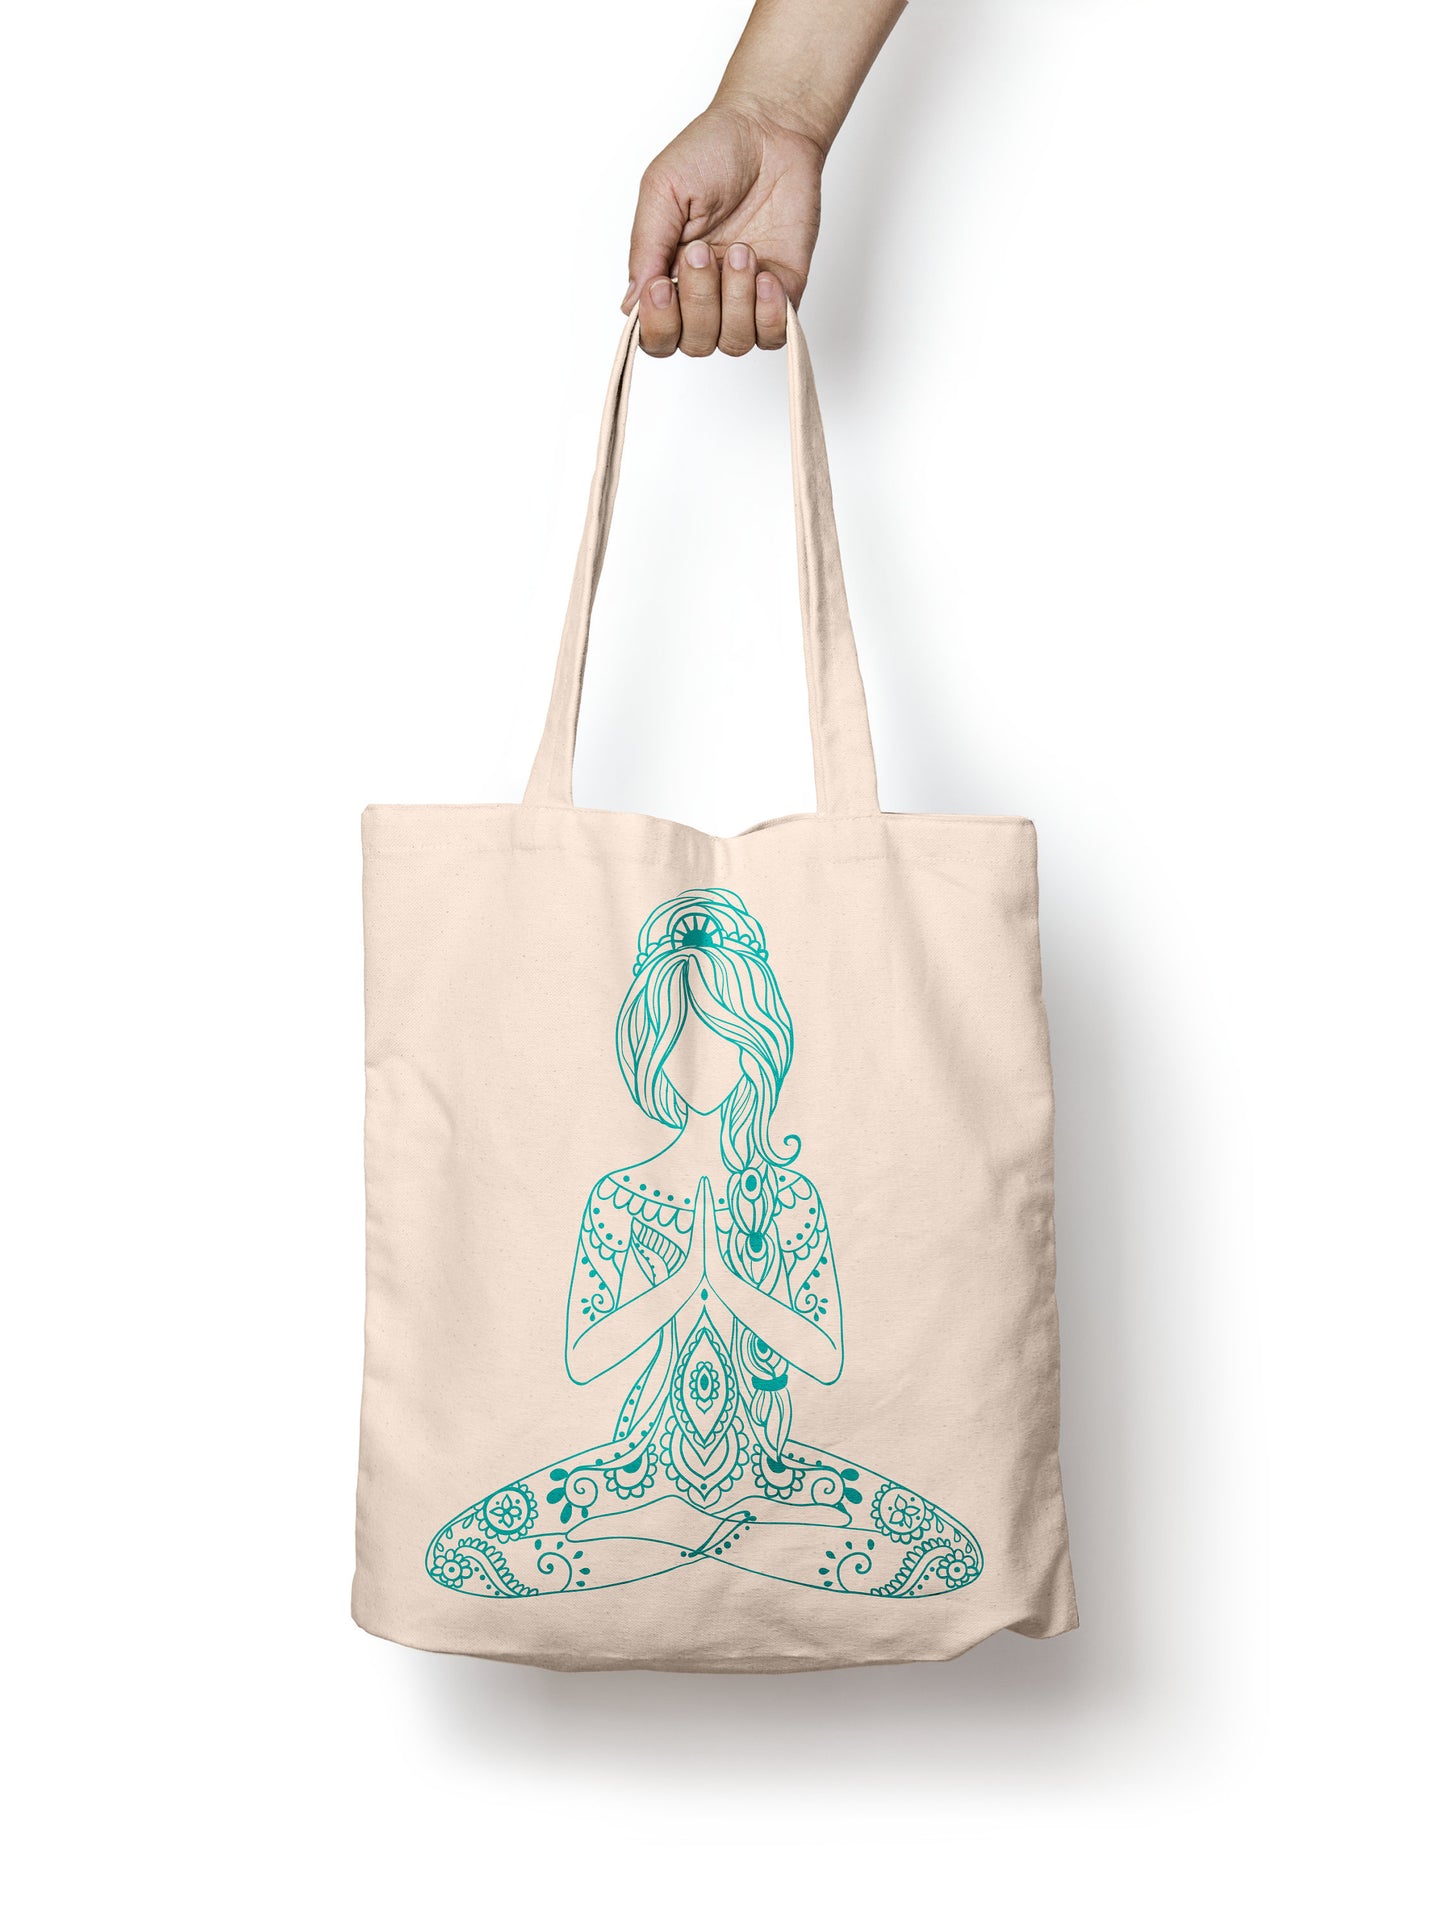 Yoga Namaste Tote 100% Cotton Fun Grocery Tote, Book Tote, Office Tote. Premium Cotton Canvas 15.5" by 19.5 " with 5" Gusset on bottom